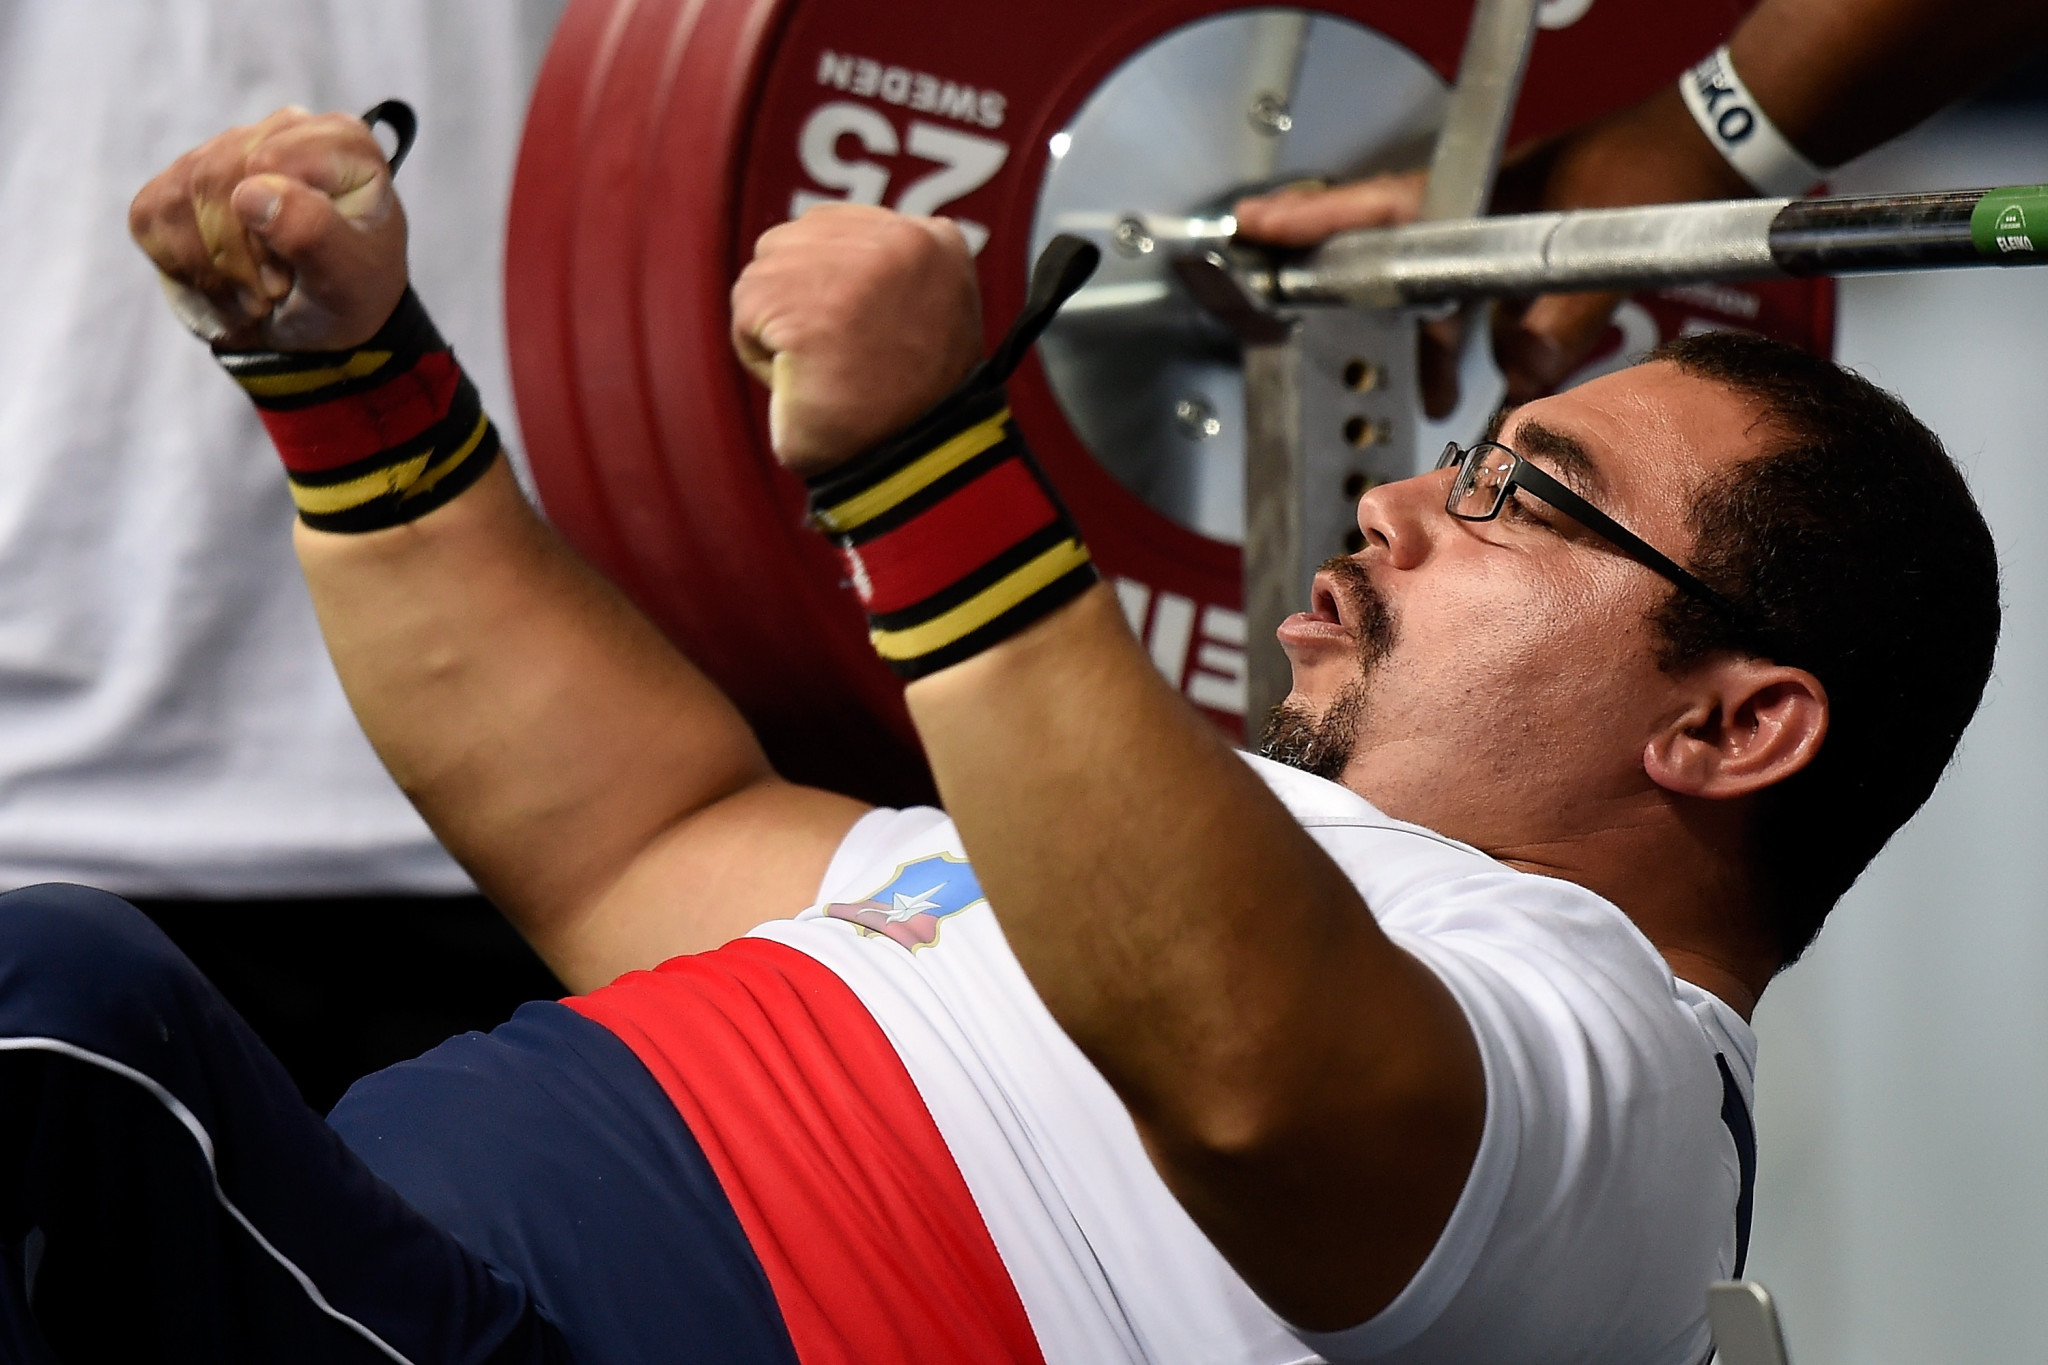 Juan Carlos Garrido helped Chile clinch gold on the final day of the World Para Powerlifting Championships ©Getty Images